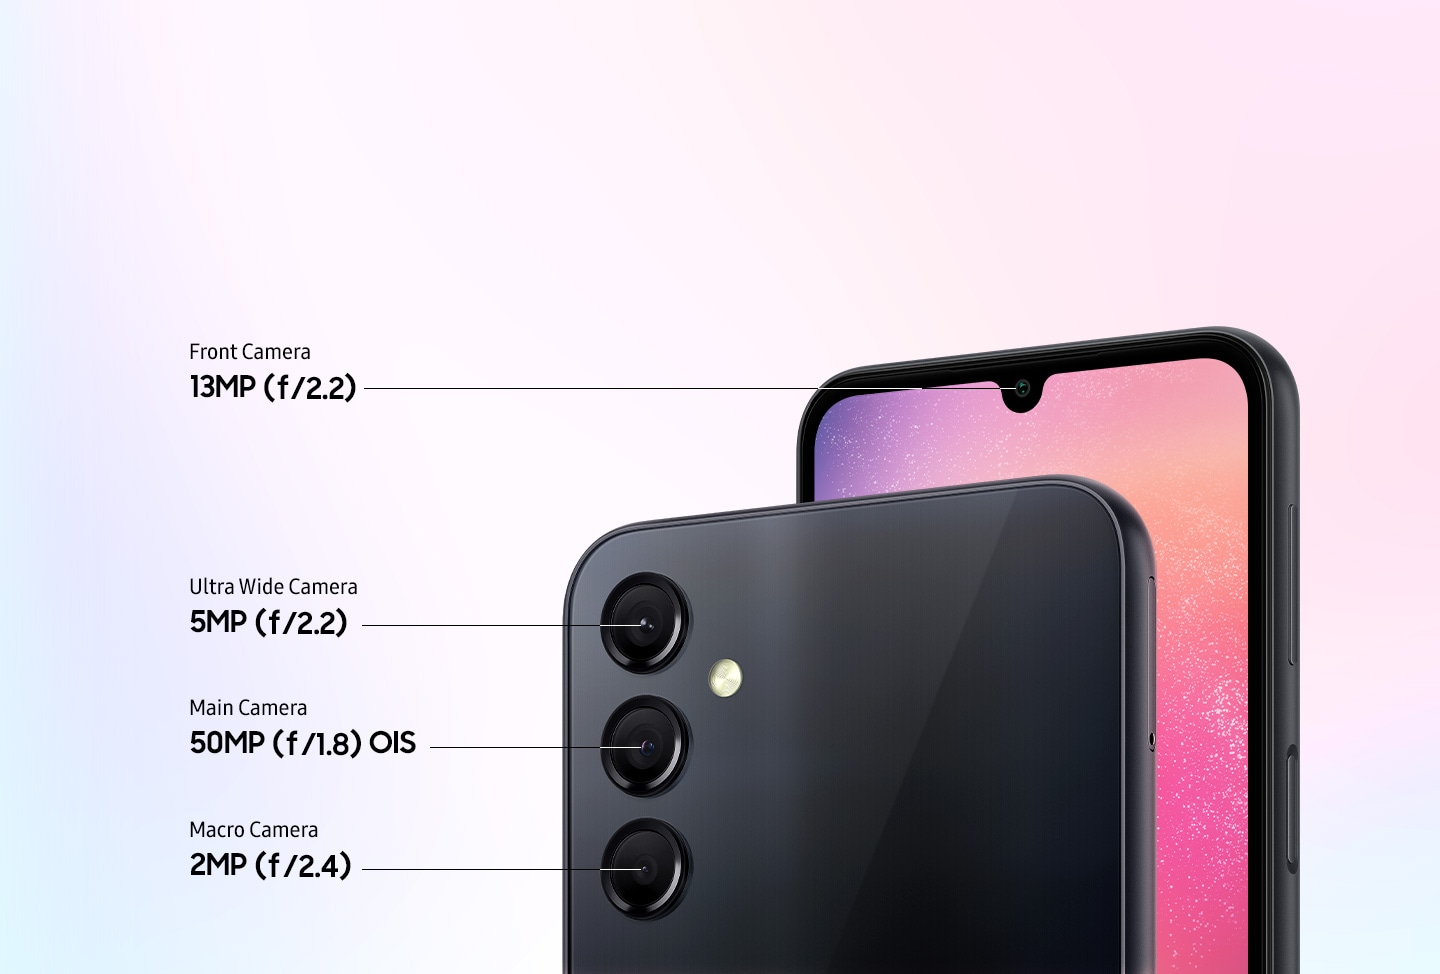 The front and back of the Galaxy A24 are shown to showcase its four multiple cameras including the 13MP f/2.2 Front Camera, the 5MP f/2.2 Ultra Wide Camera, the 50MP f/1.8 OIS Main Camera and the 2MP f/2.4 Macro Camera.